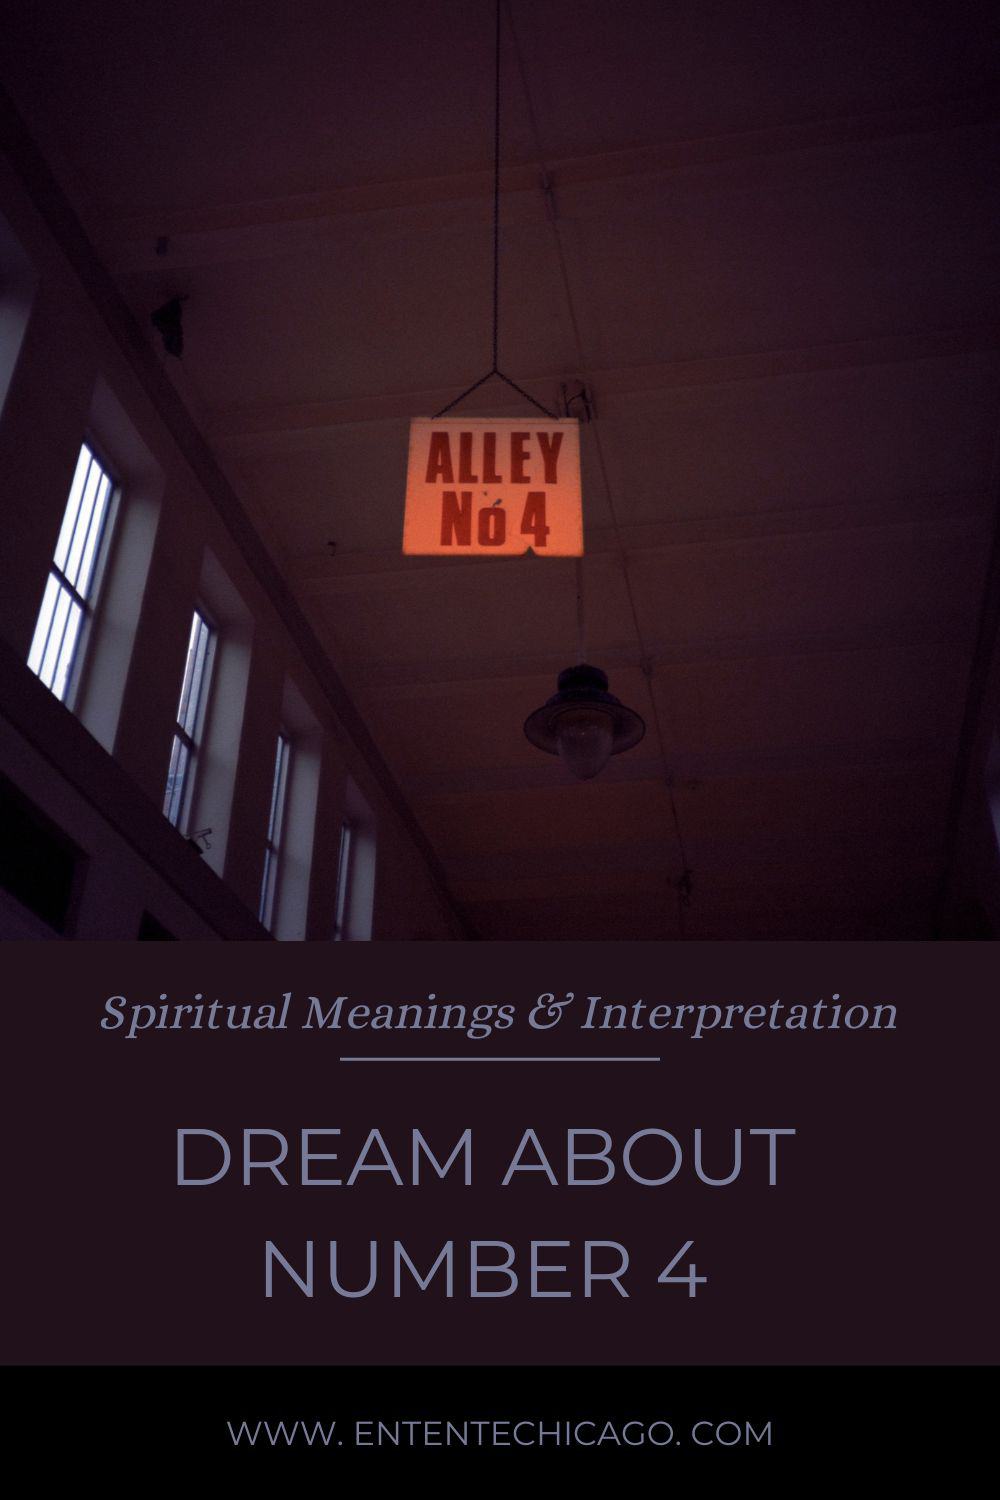 Dream About Number 4 (Spiritual Meanings & Interpretation)